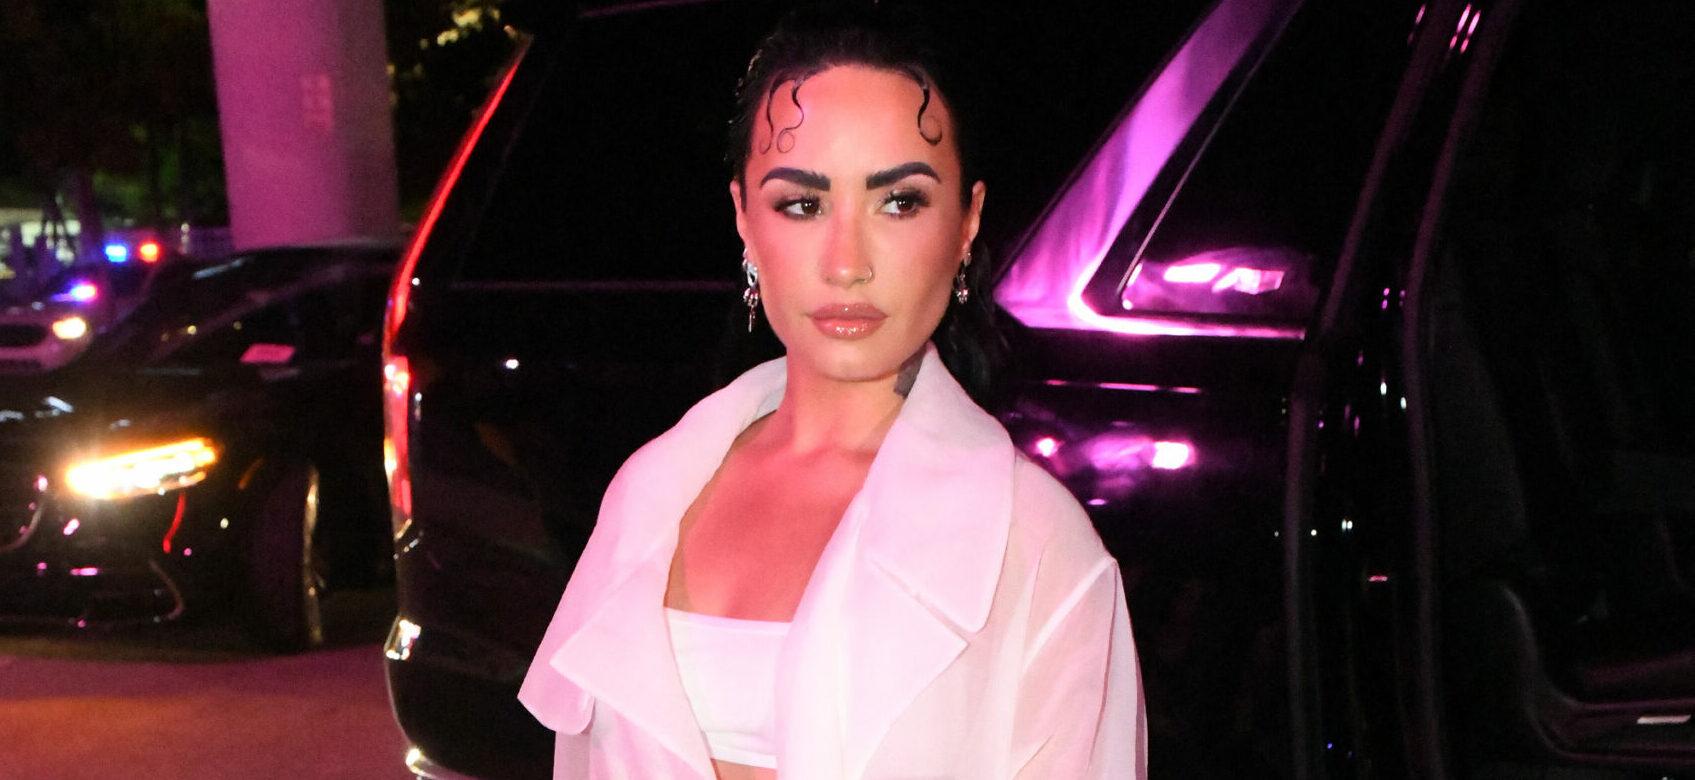 Demi Lovato Gushes About Making Directorial Debut In Upcoming Hulu Documentary: ‘So Excited’